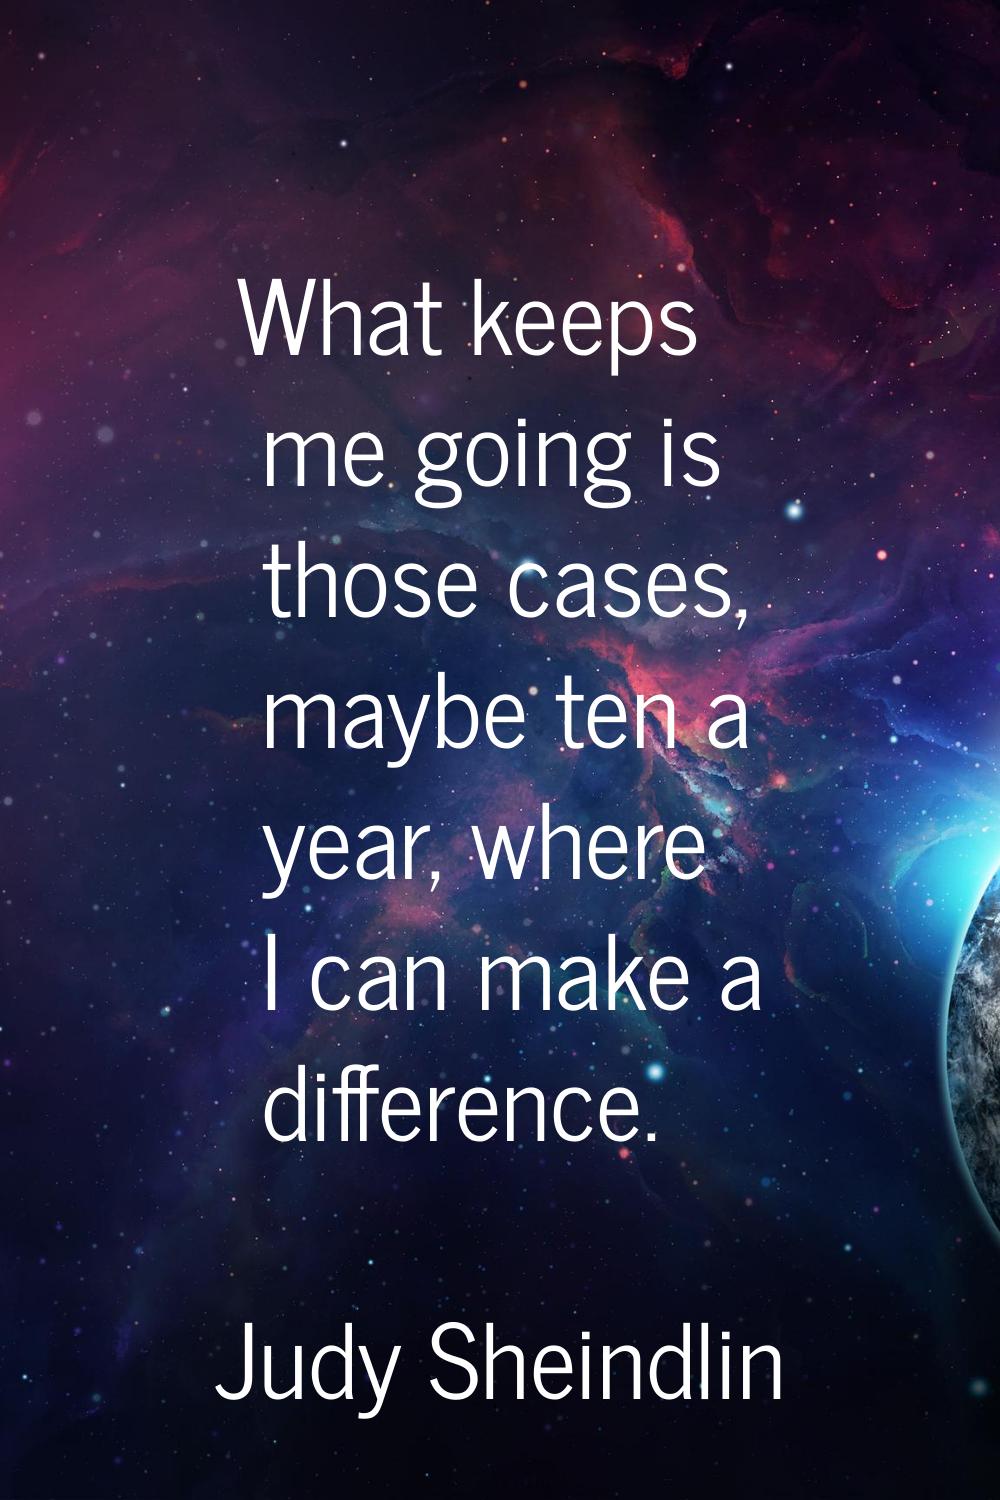 What keeps me going is those cases, maybe ten a year, where I can make a difference.